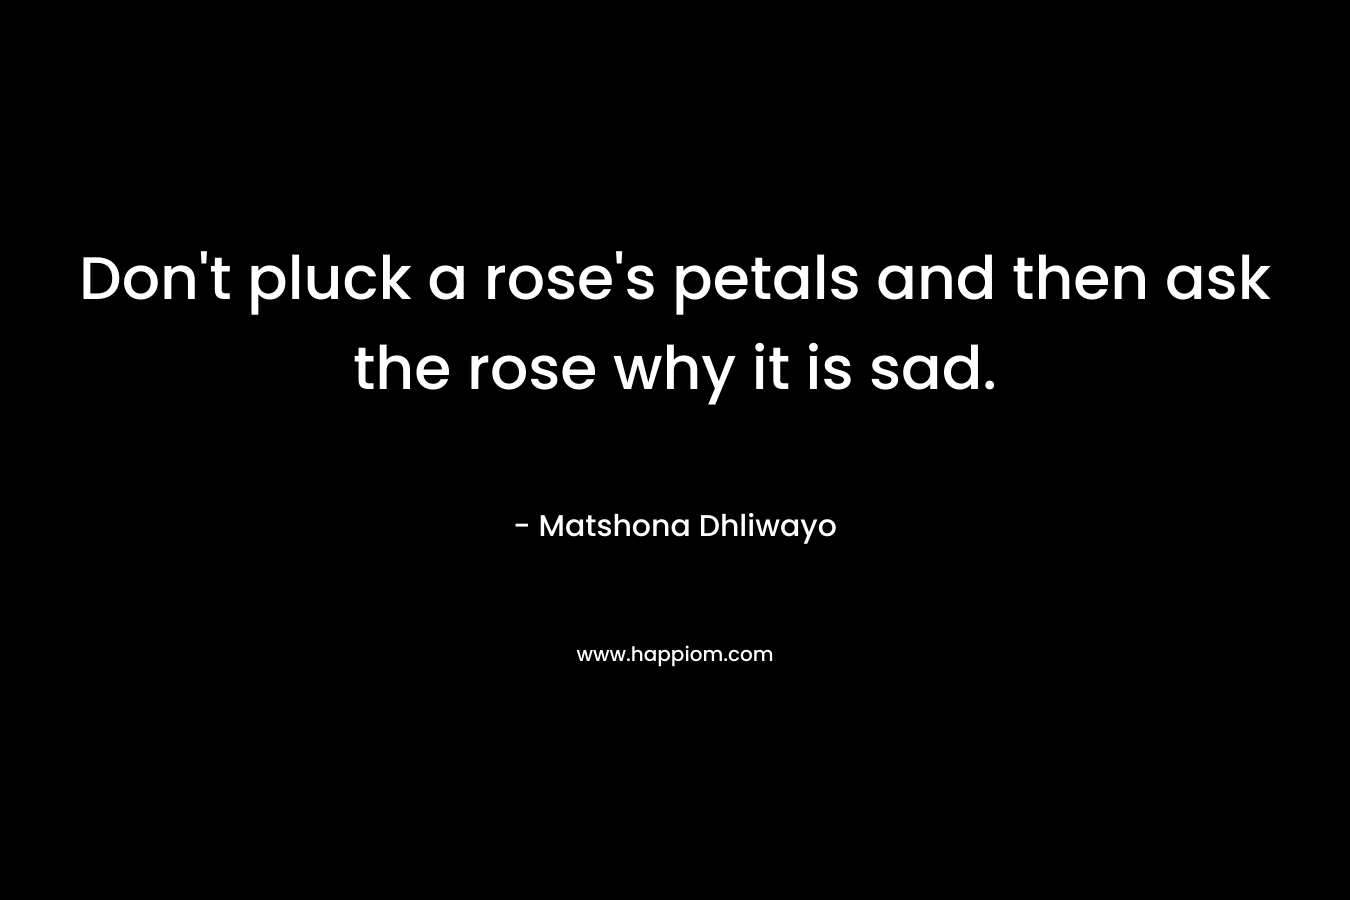 Don’t pluck a rose’s petals and then ask the rose why it is sad. – Matshona Dhliwayo